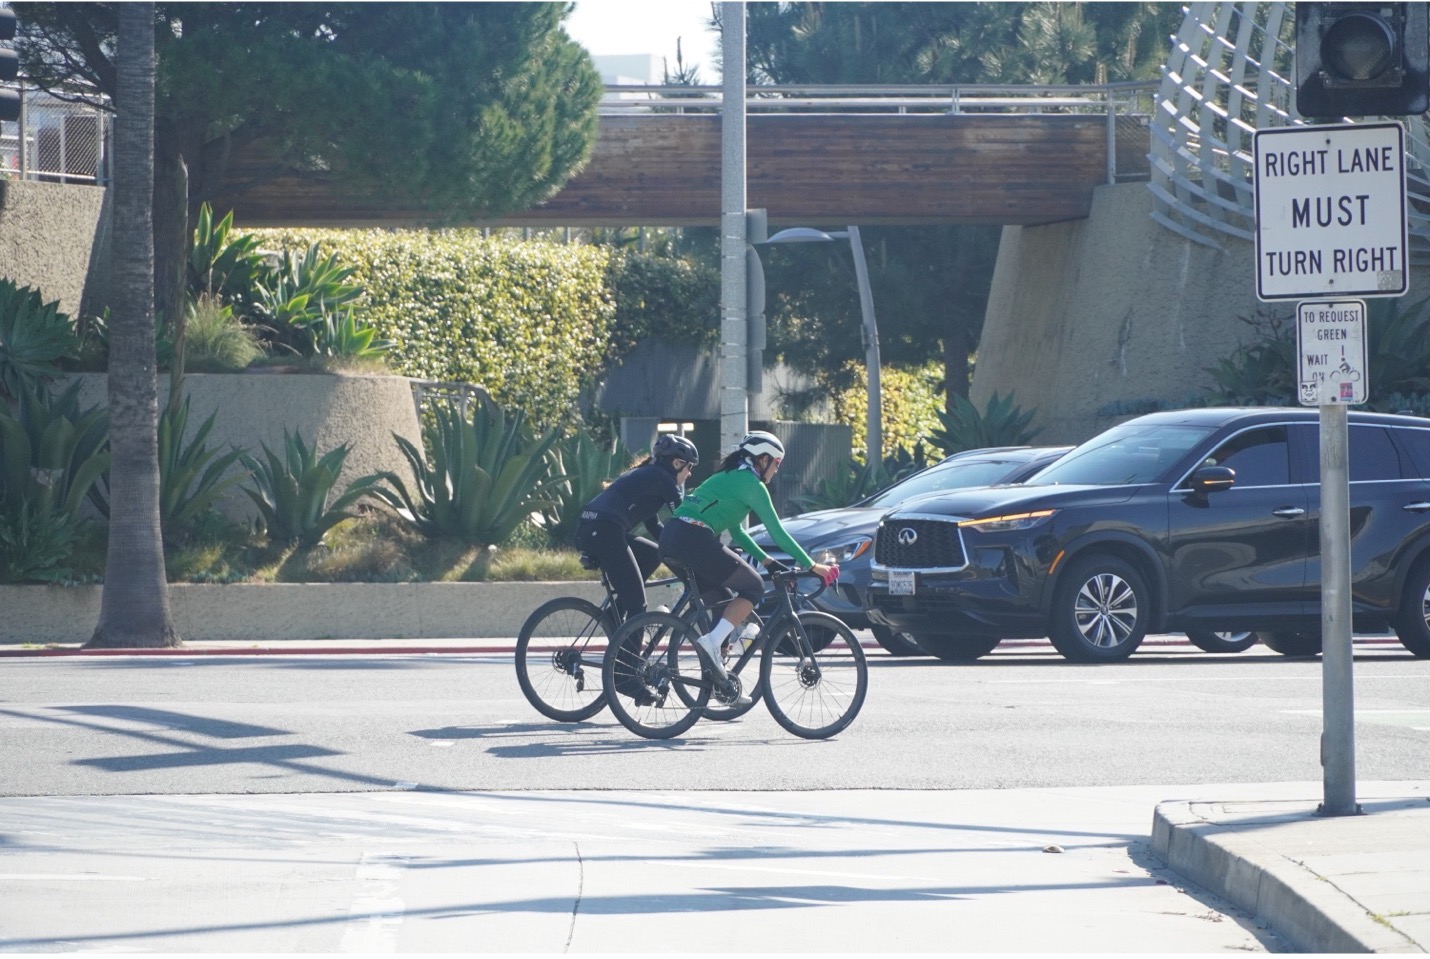 2 people riding bicycles